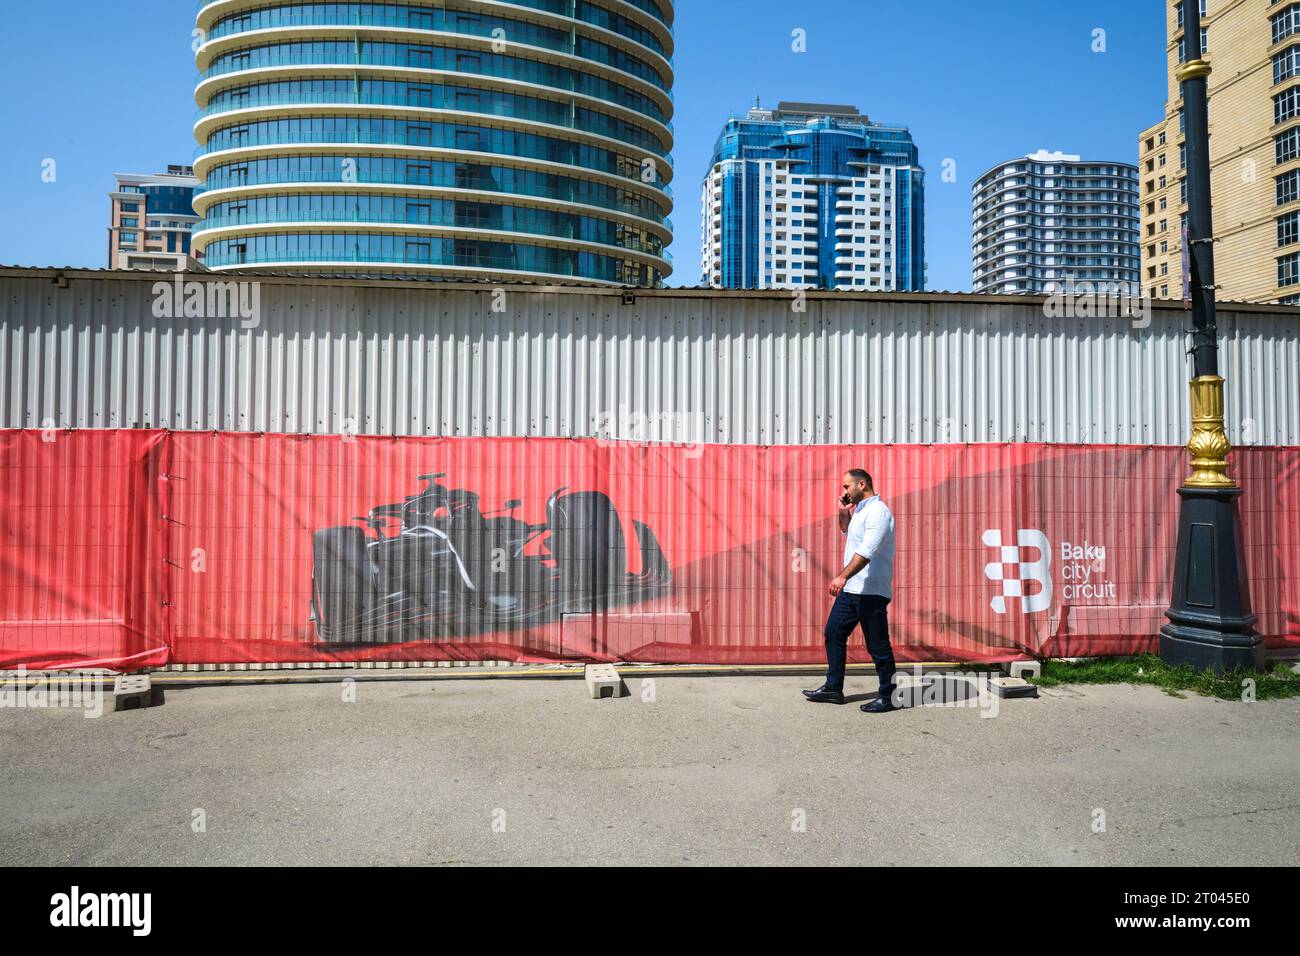 A man walks along temporary fencing with large, red race car graphic. At the Formula 1, Formula One race track prep area in Baku, Azerbaijan. Stock Photo